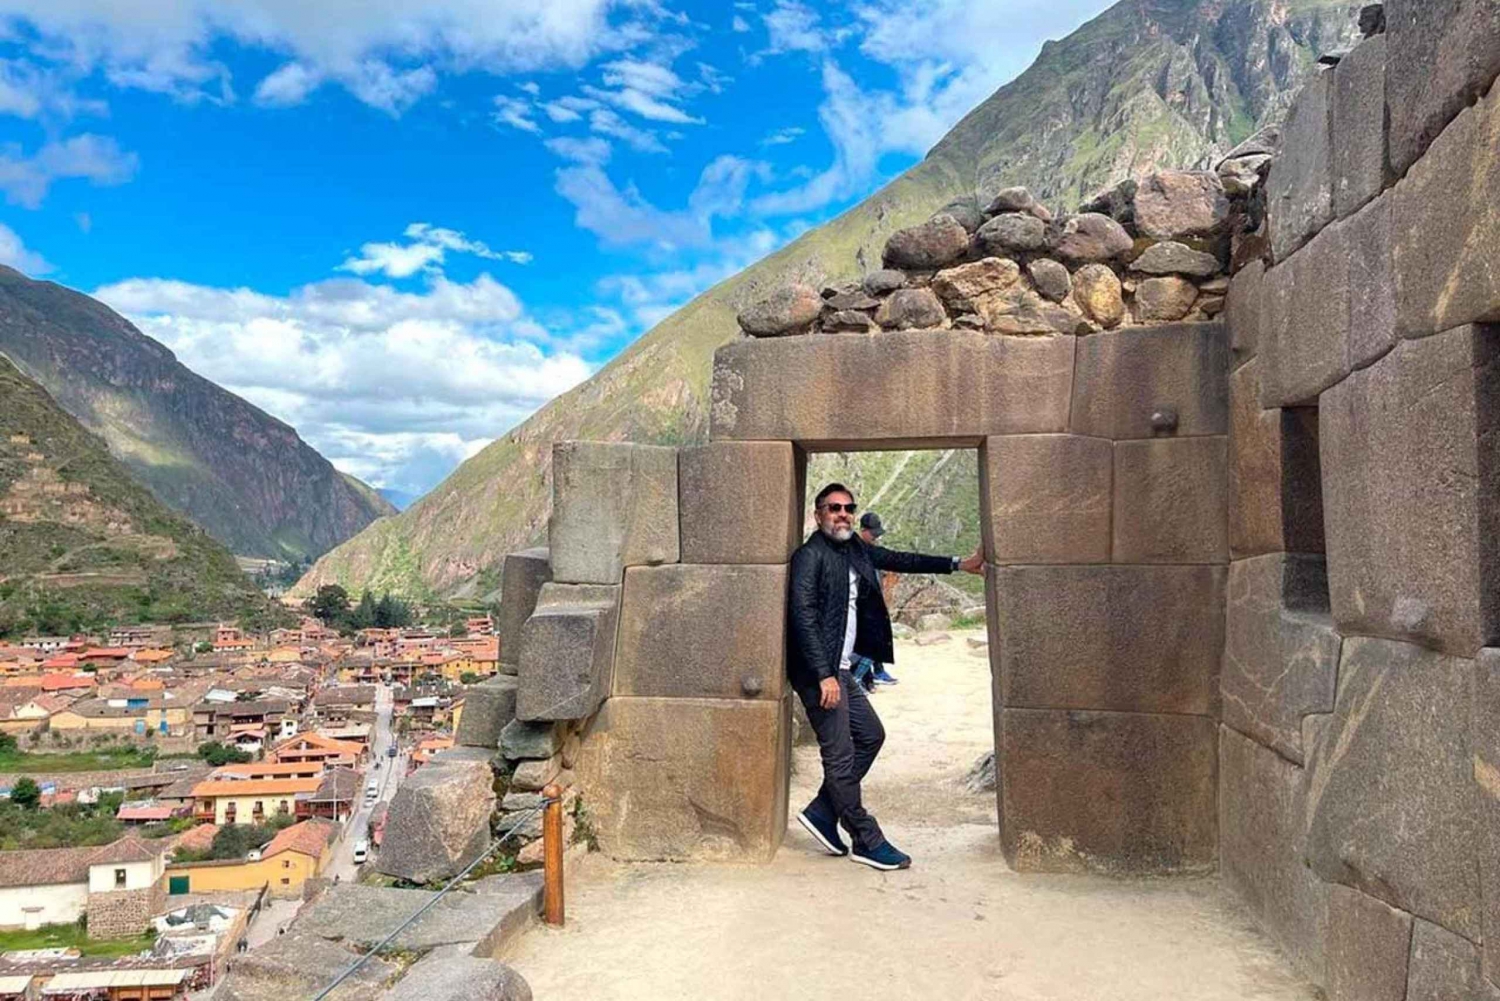 Excursion to the Sacred Valley of the Incas